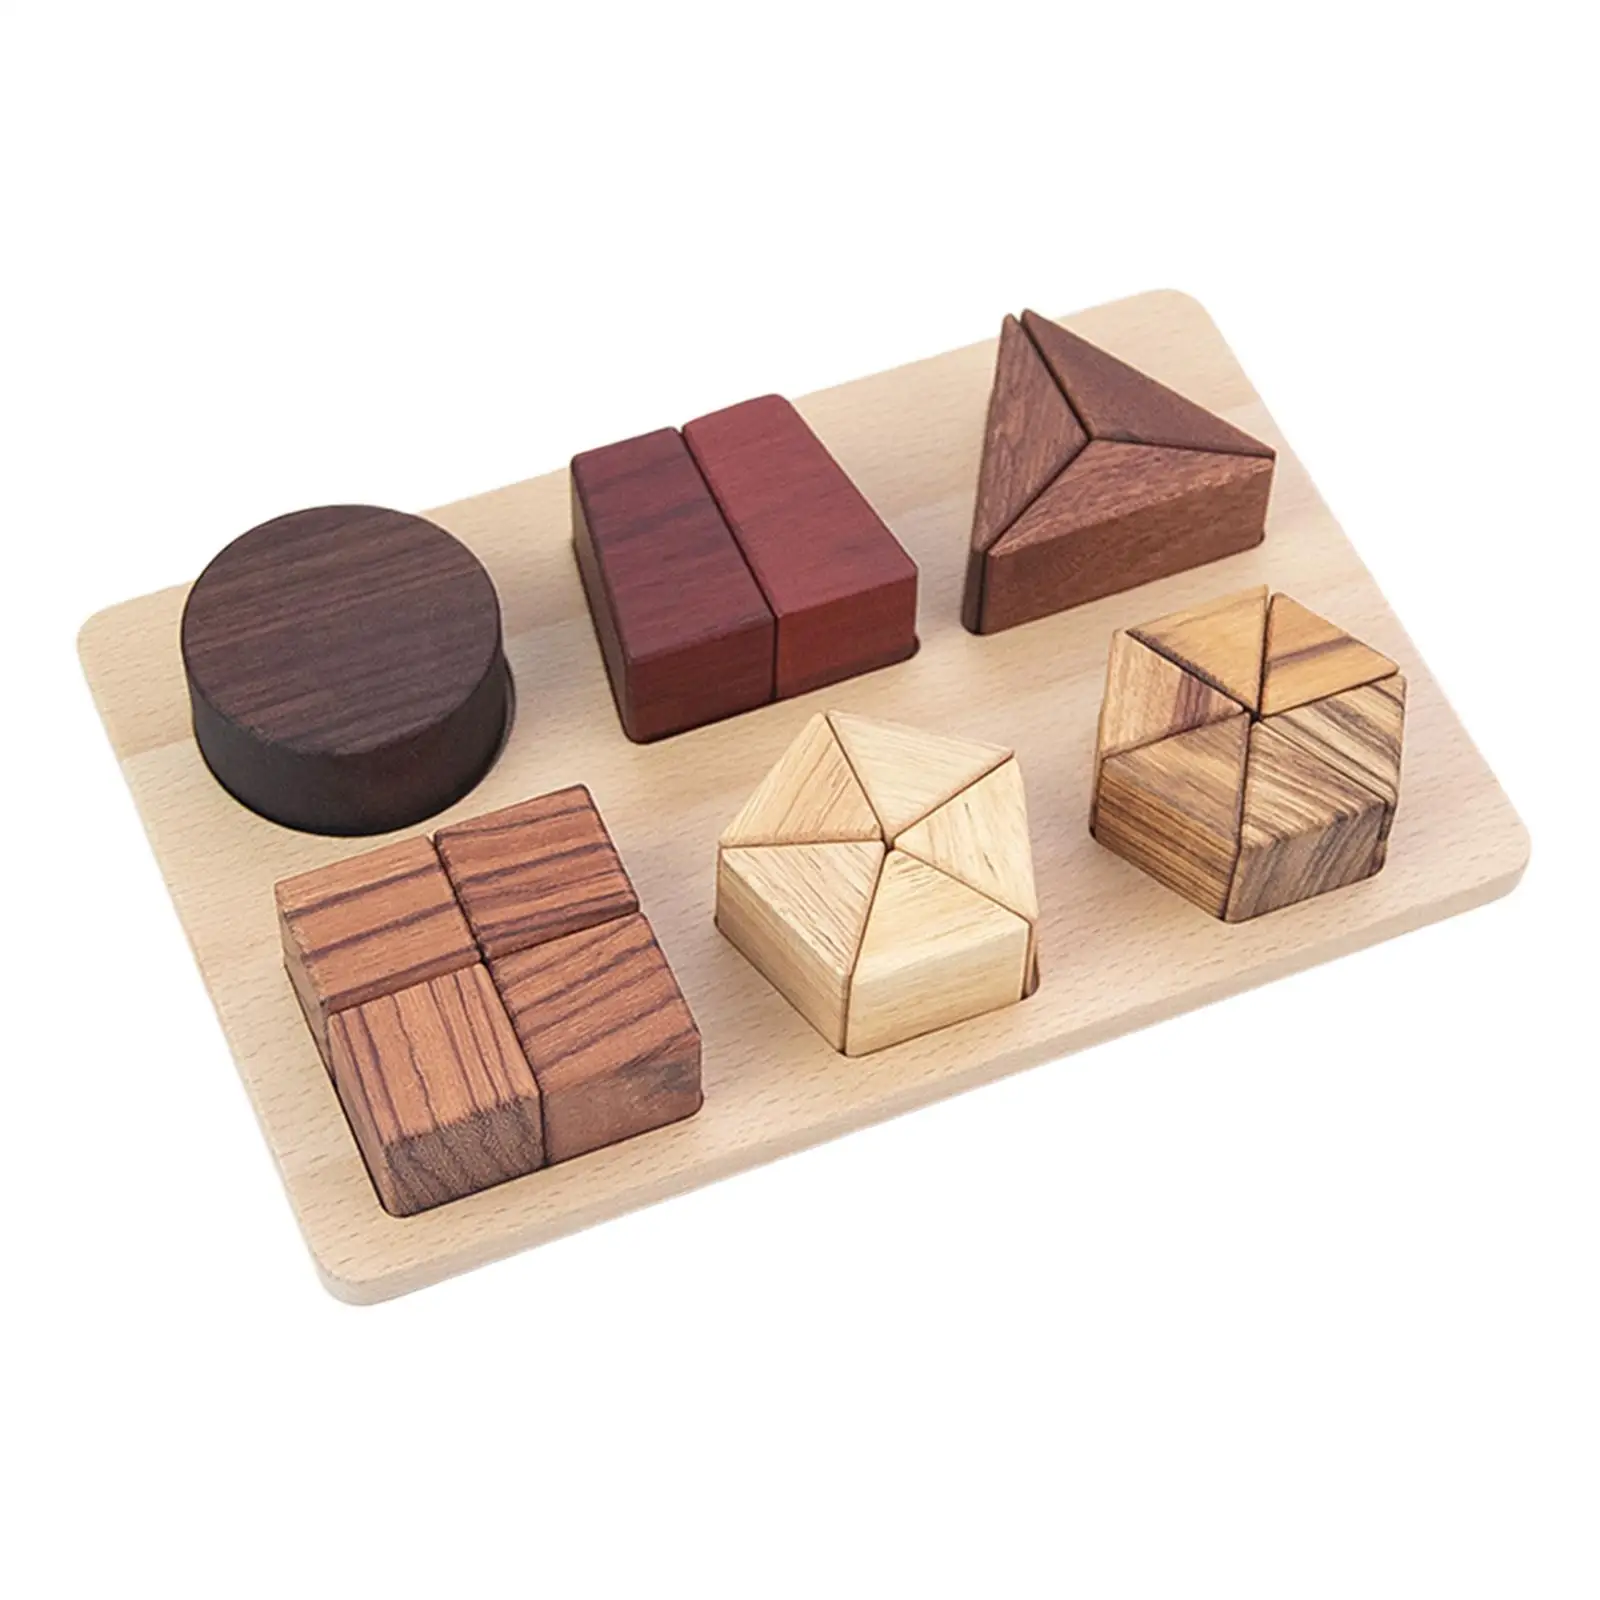 Wooden Shape Cognition Puzzles Geometry Board Toys for Children Toddlers